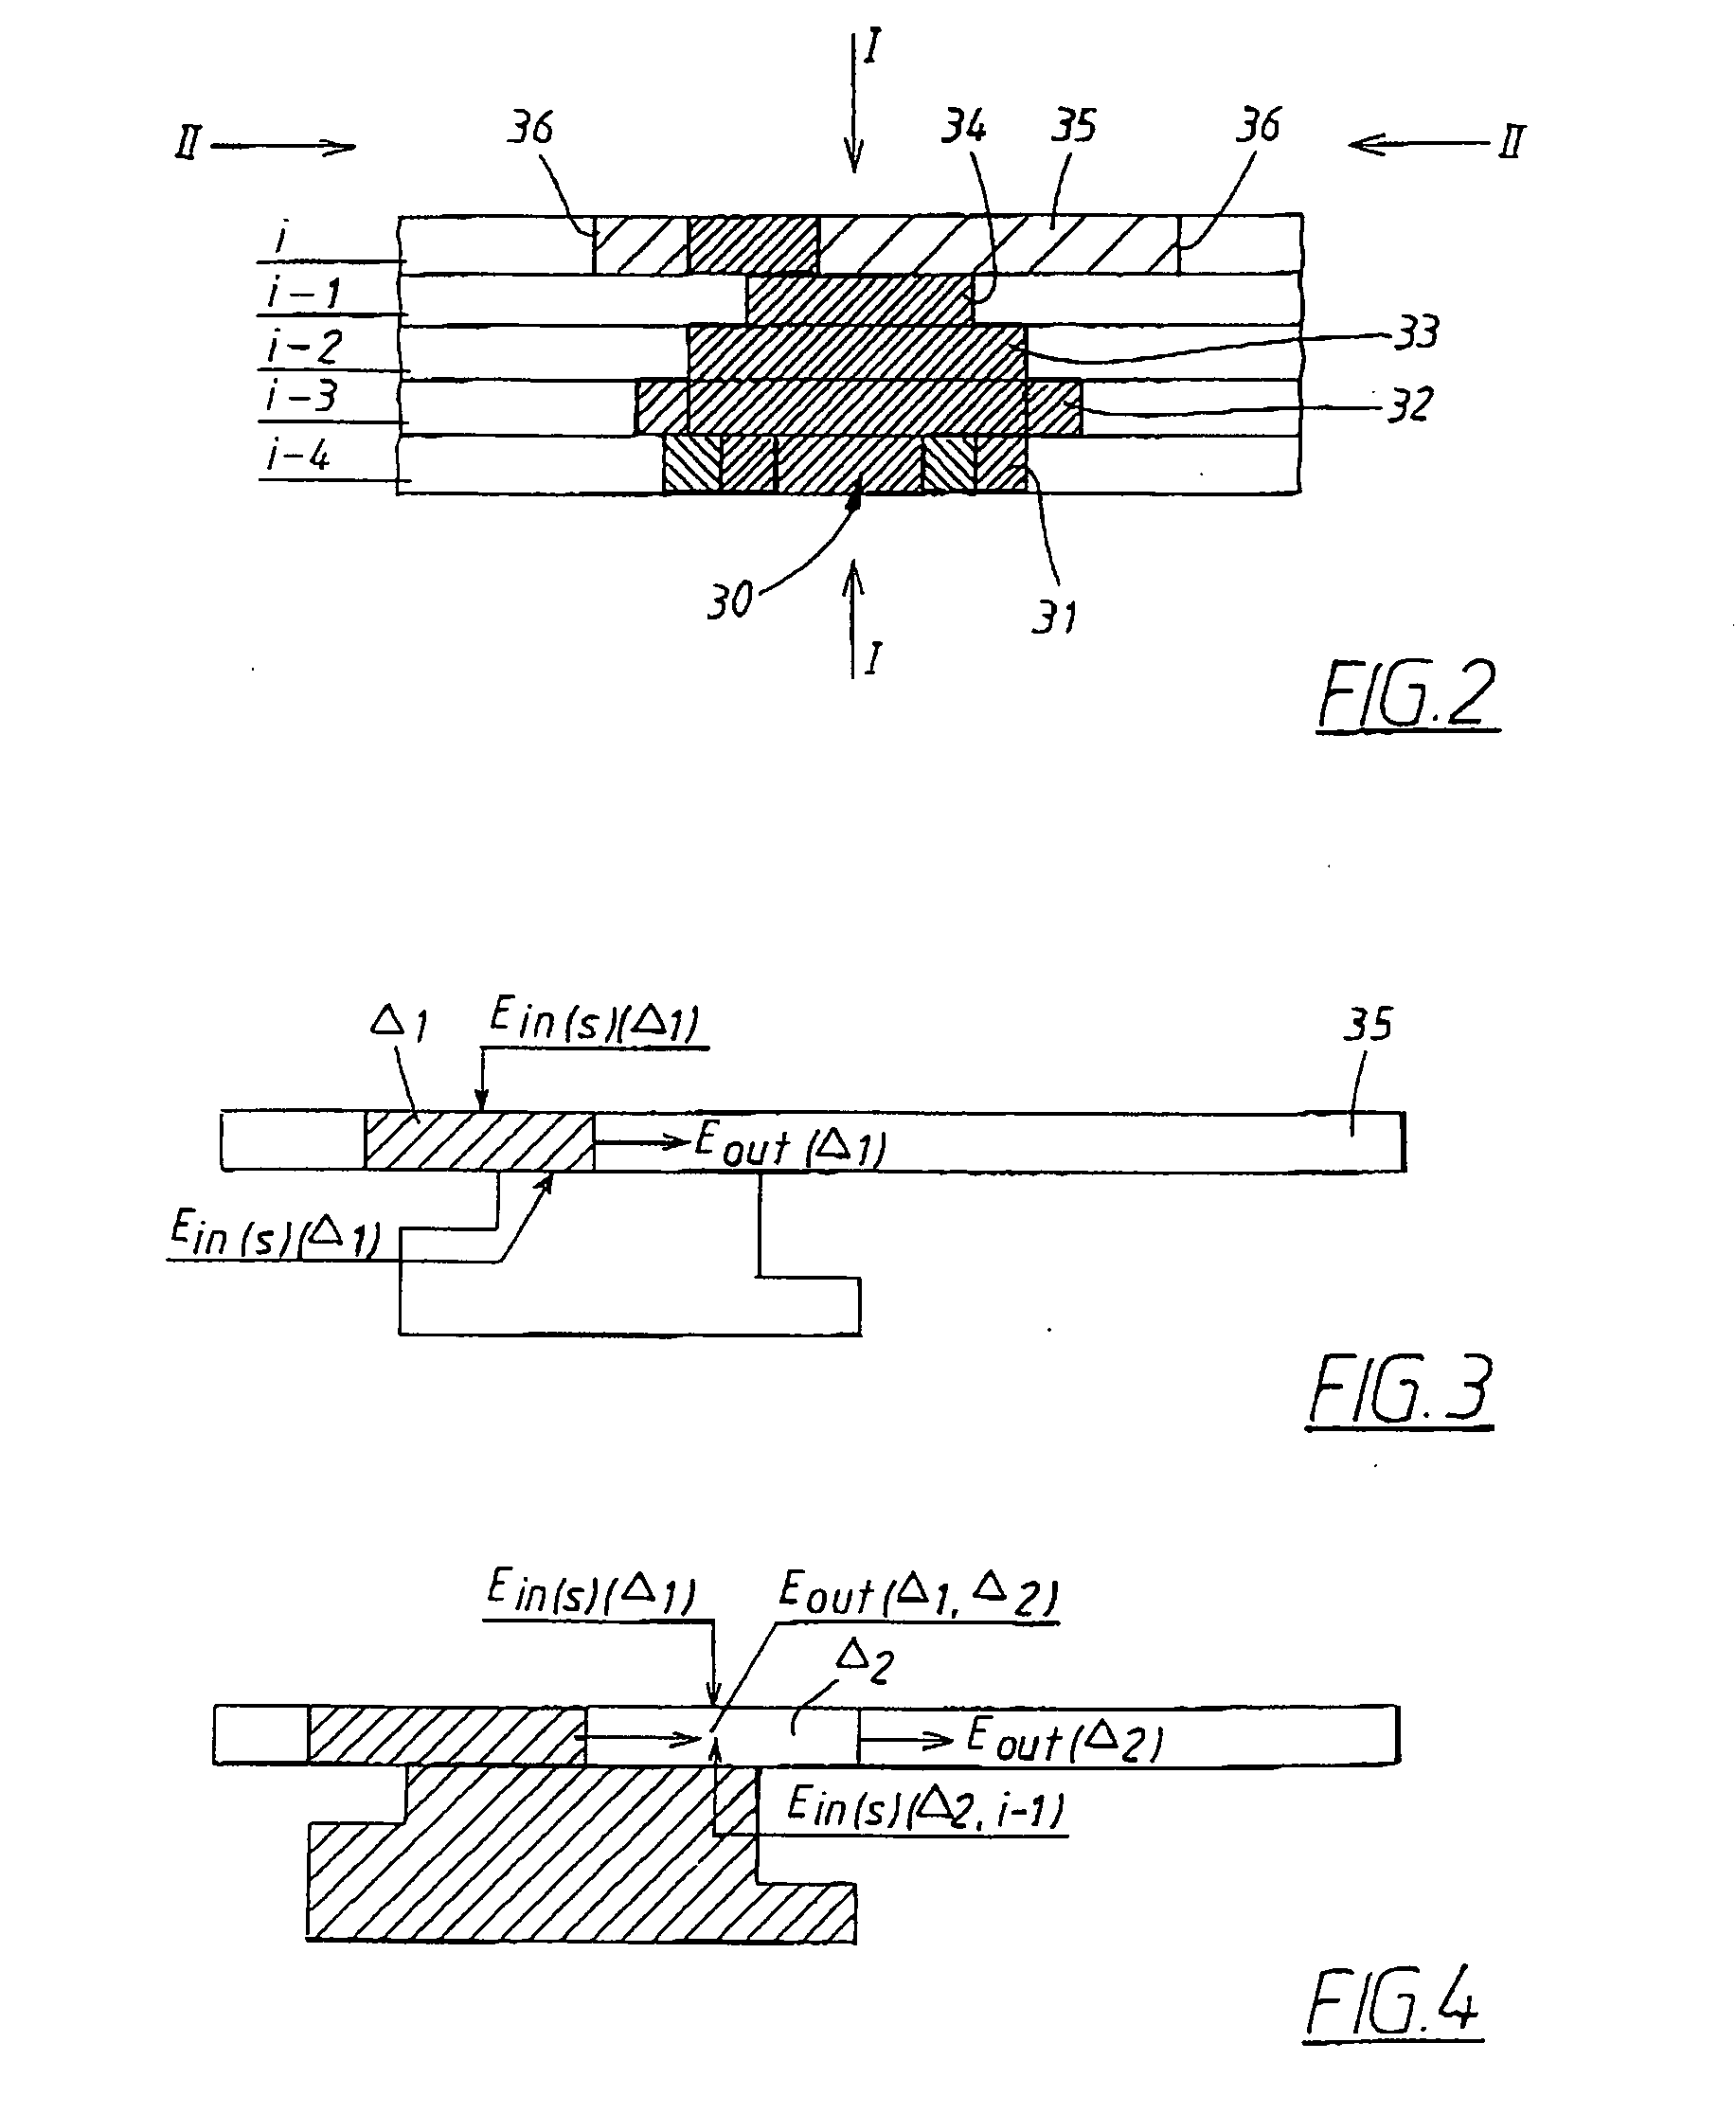 Arrangement and method for producing a three-dimensional product